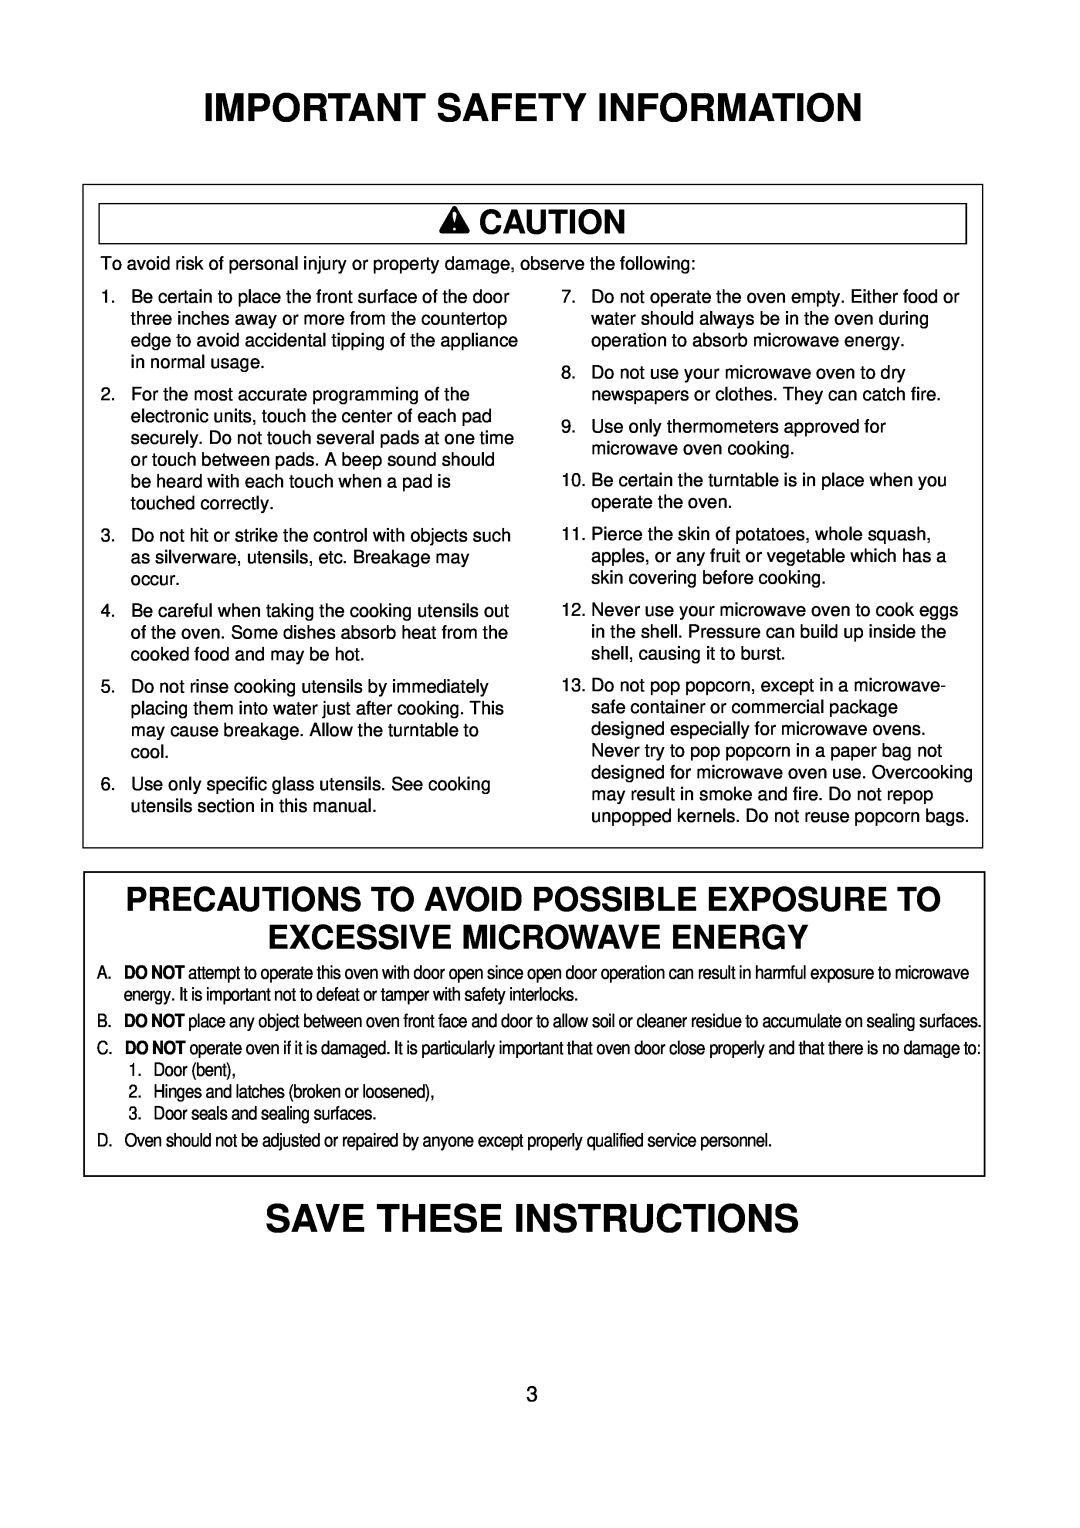 Amana ACM0720A Important Safety Information, Save These Instructions, Precautions To Avoid Possible Exposure To, wCAUTION 